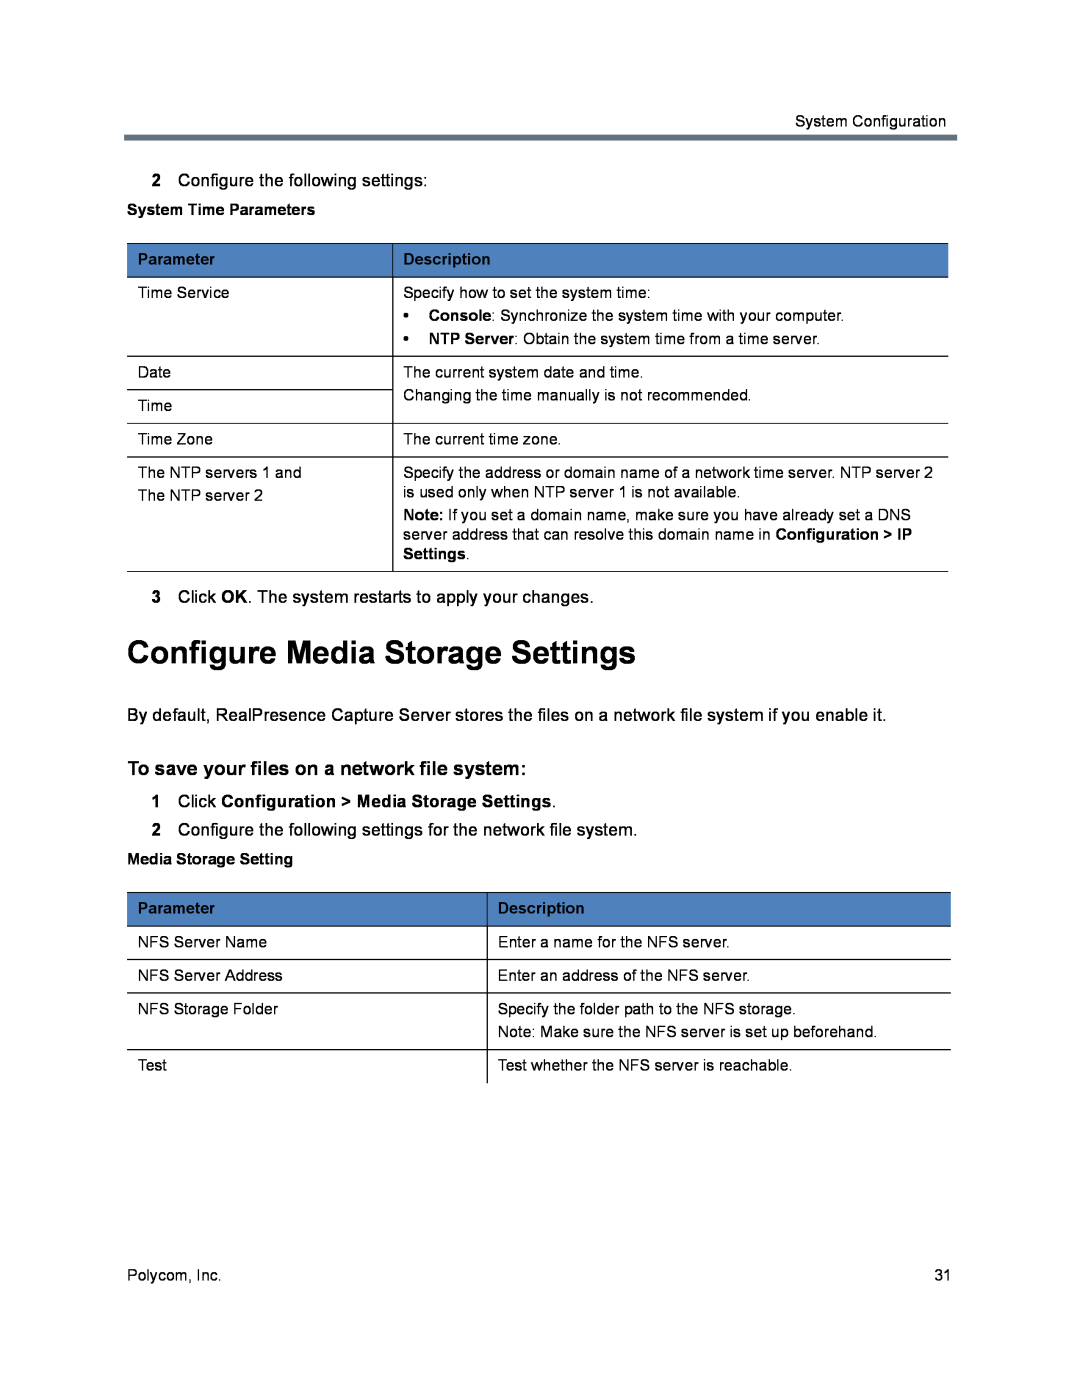 Polycom 40/0 manual Configure Media Storage Settings, To save your files on a network file system, System Time Parameters 